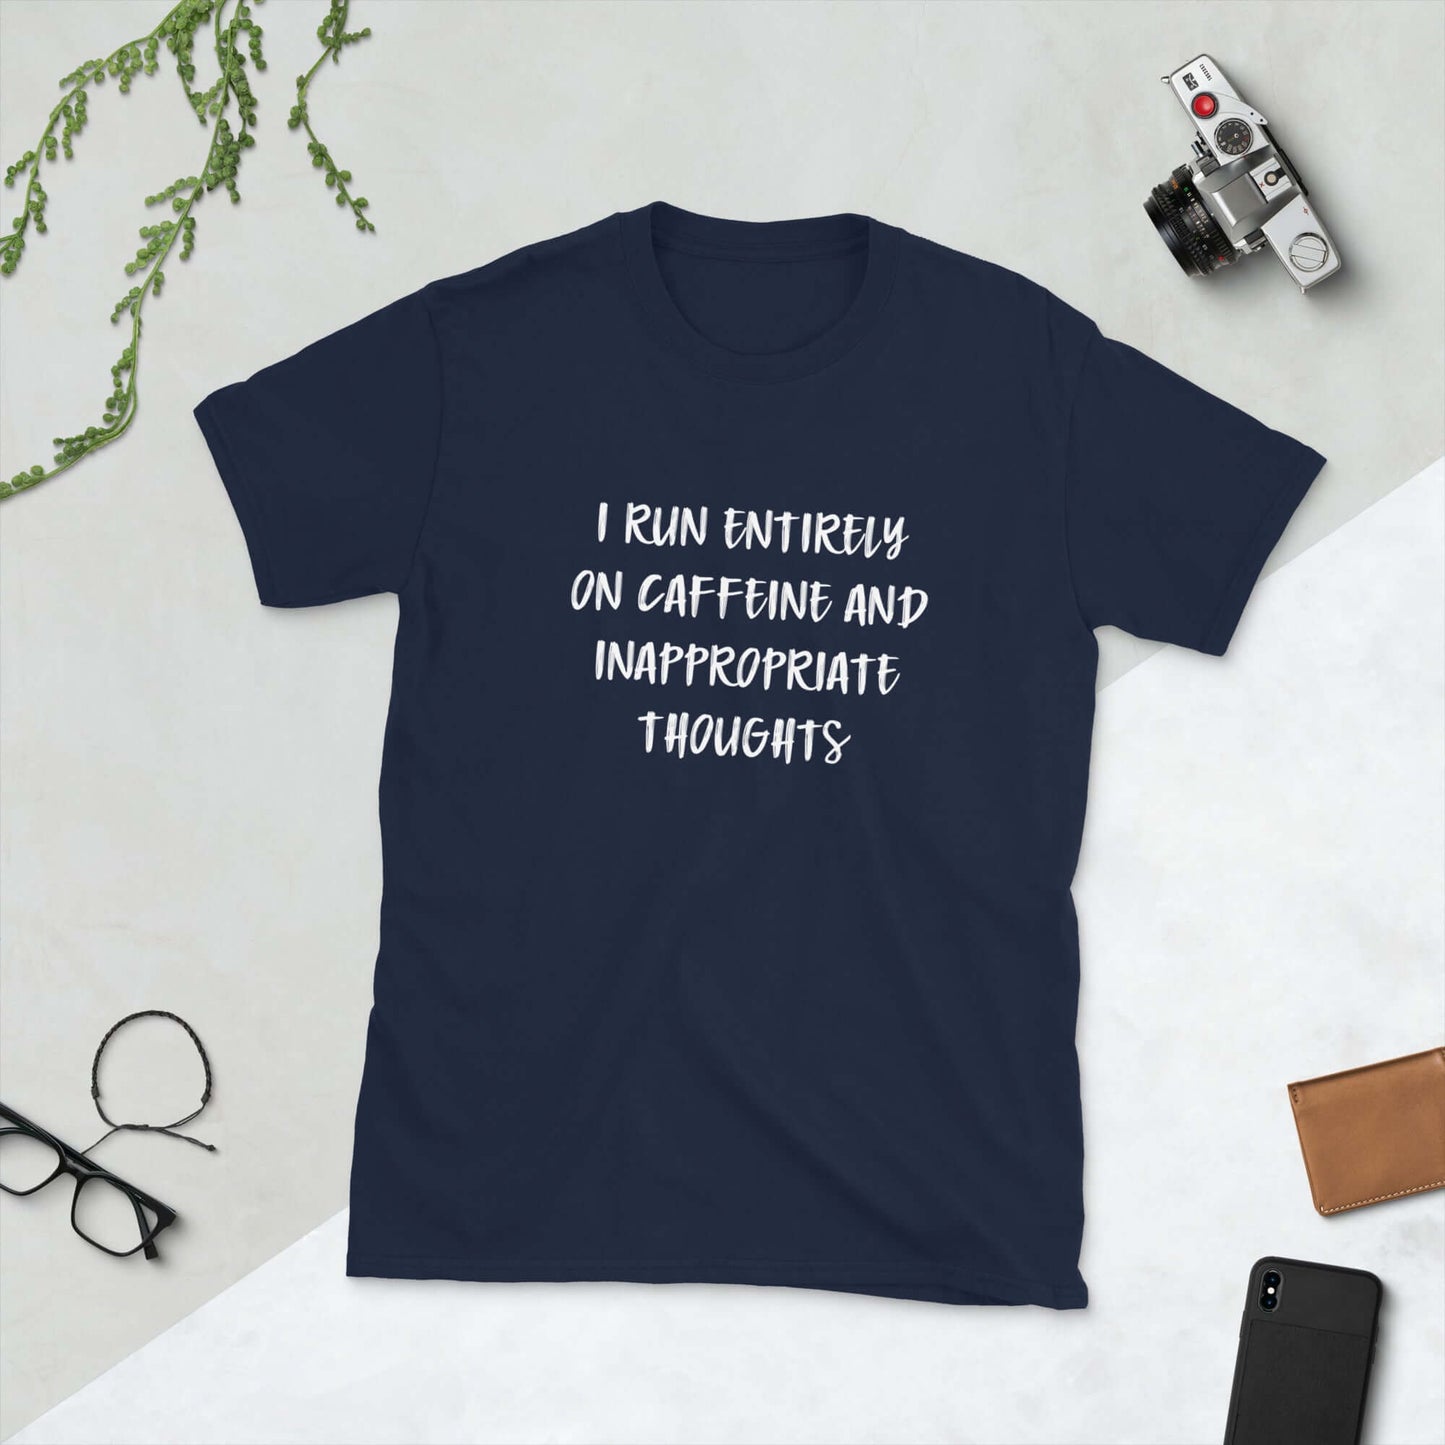 Navy blue t-shirt with the words I run entirely on caffeine & inappropriate thoughts printed on the front.